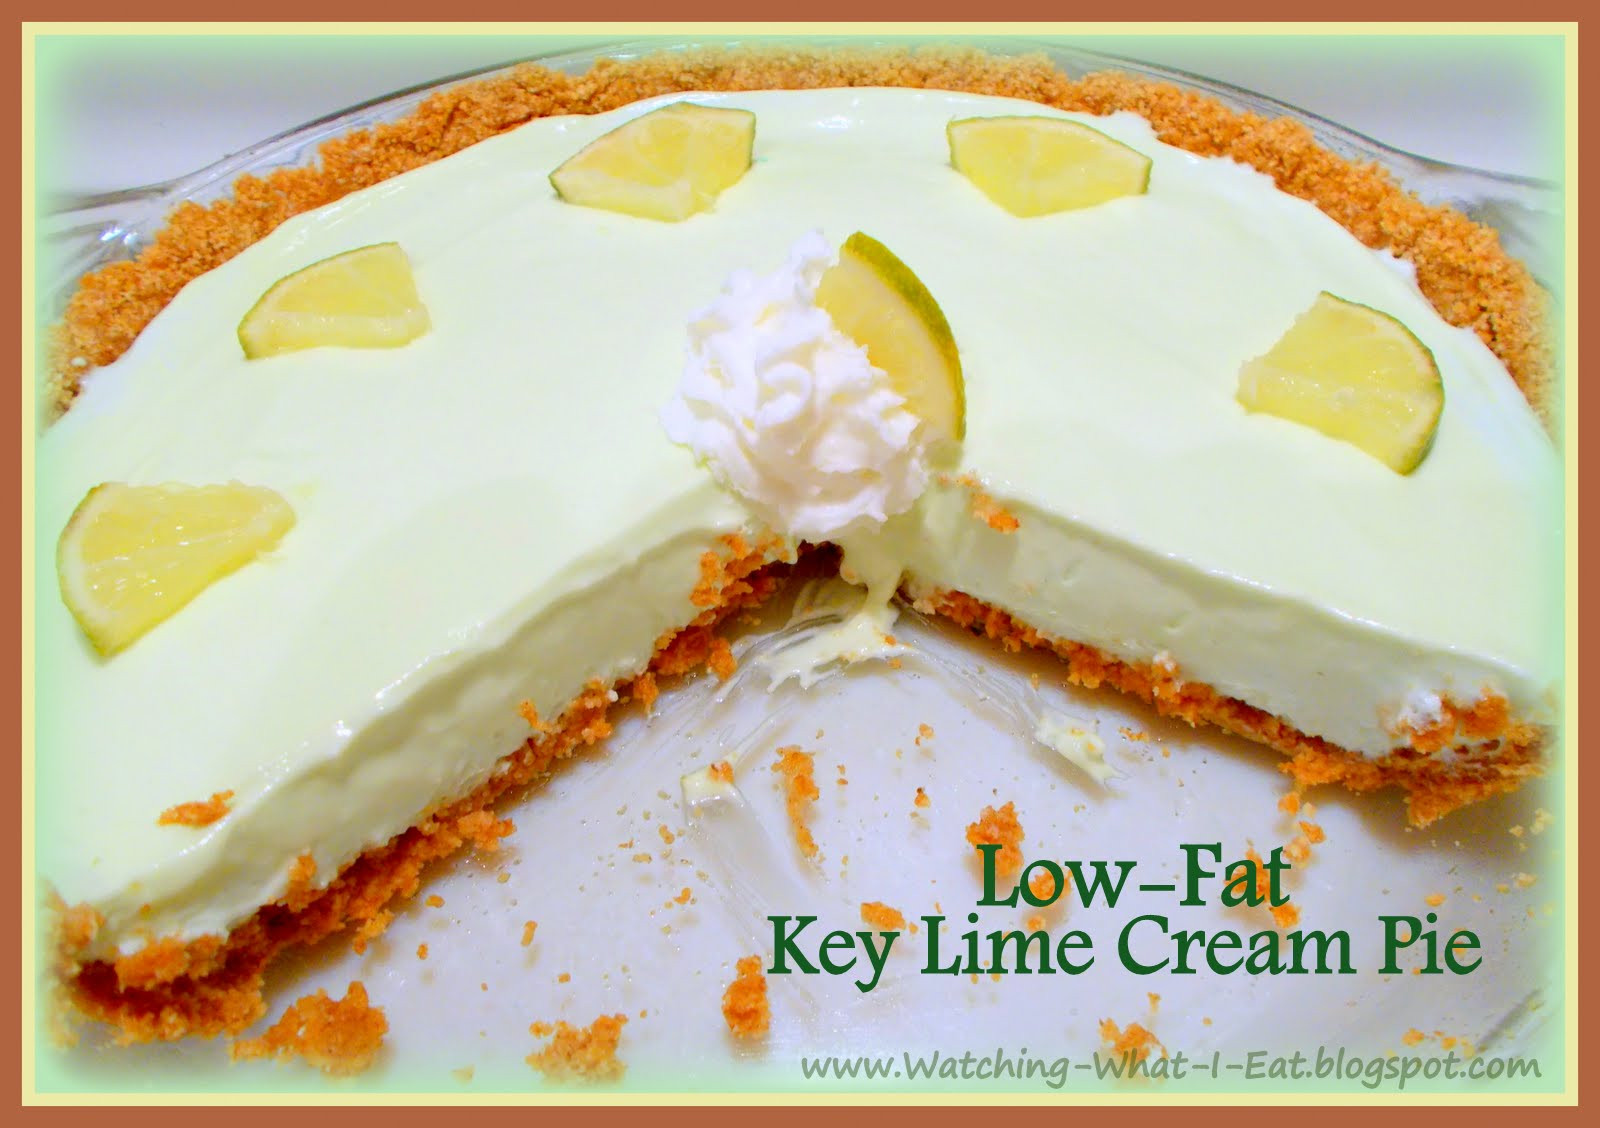 Low Fat Key Lime Pie
 Watching What I Eat Key Lime Cream Pie with No Bake